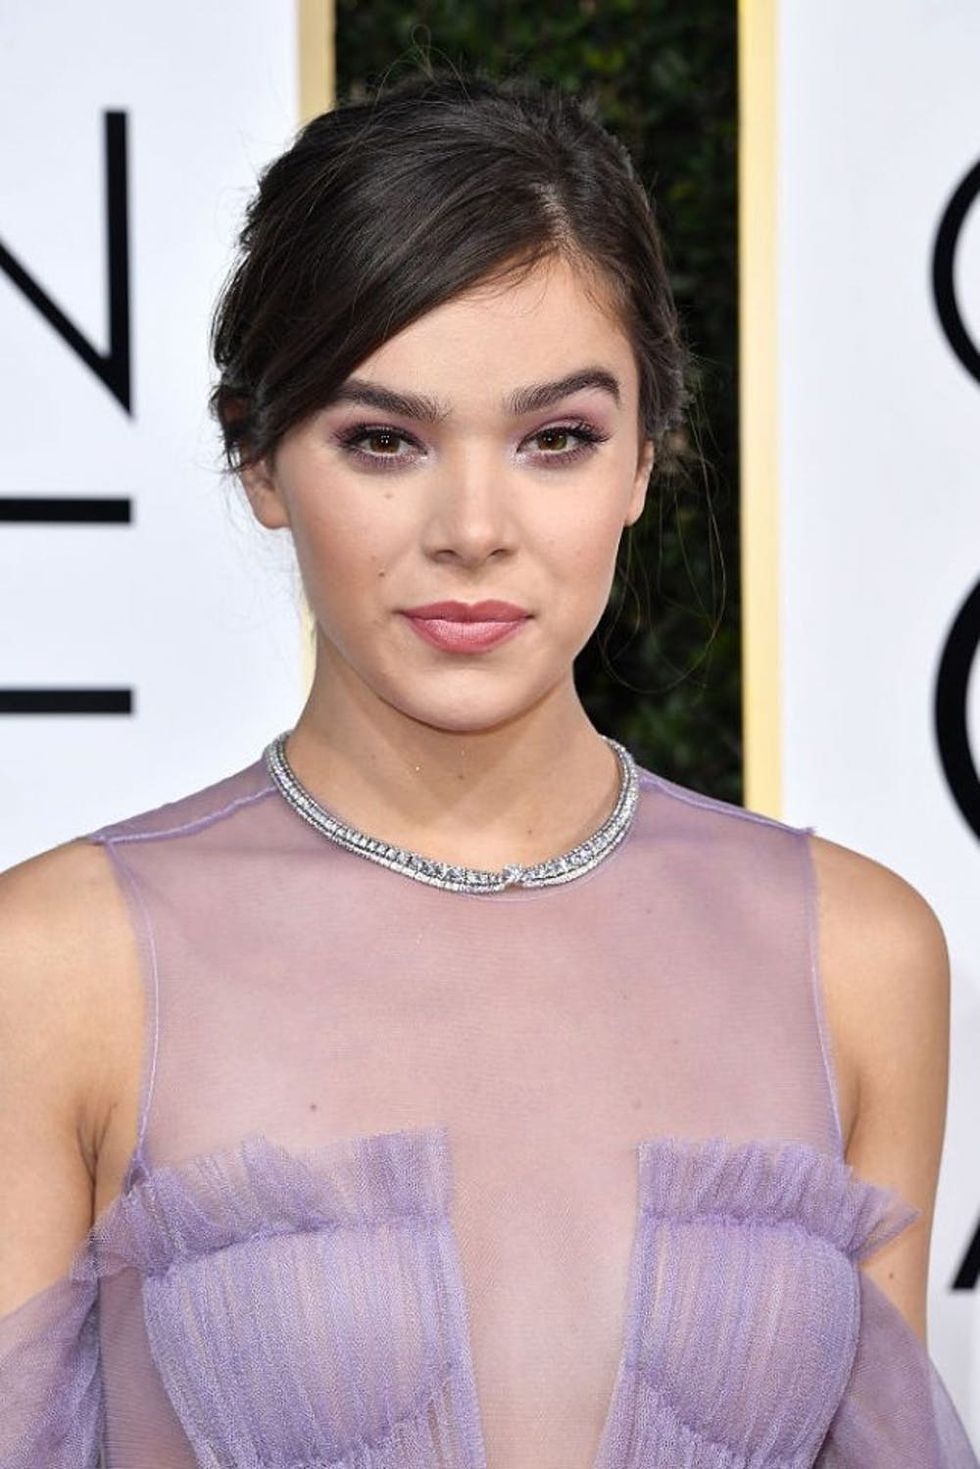 BEVERLY HILLS, CA - JANUARY 08: Actress/singer Hailee Steinfeld attends the 74th Annual Golden Globe Awards at The Beverly Hilton Hotel on January 8, 2017 in Beverly Hills, California. (Photo by Steve Granitz/WireImage)